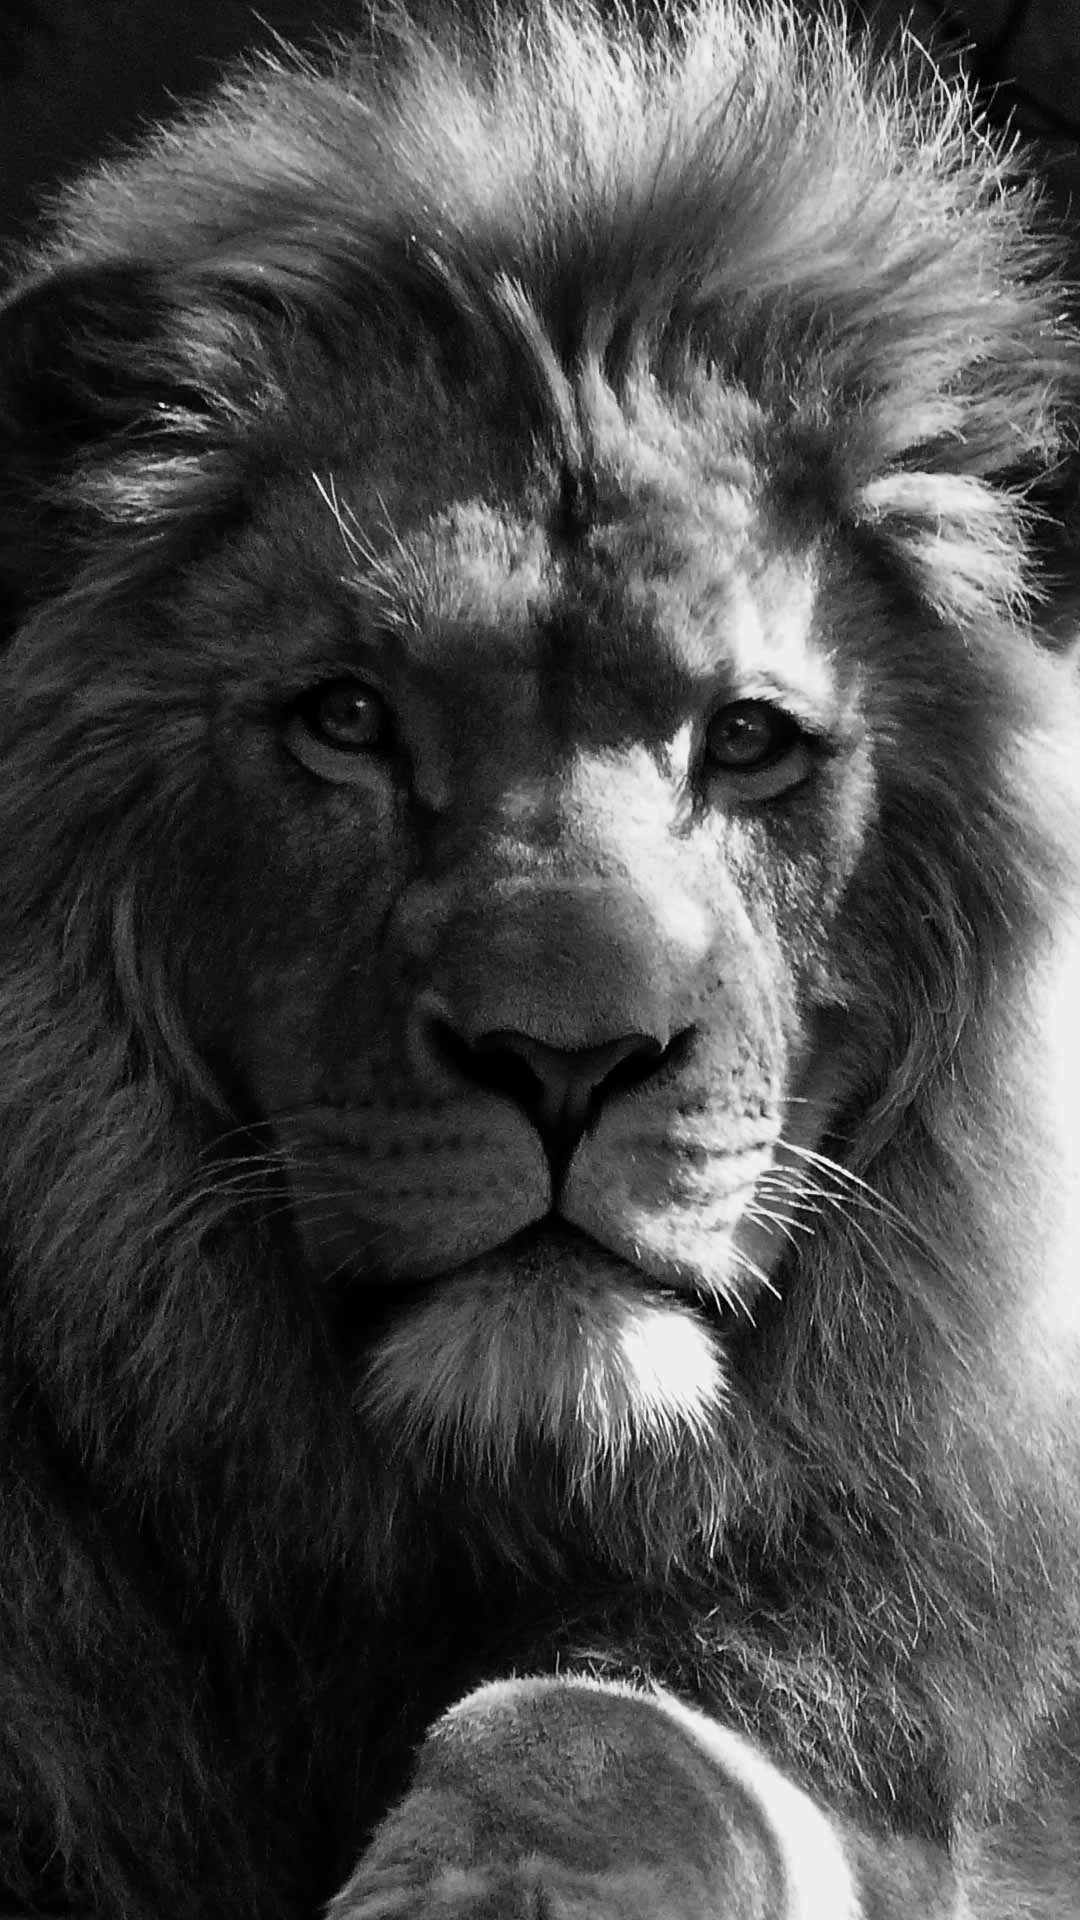 A lion staring into the camera. - Lion